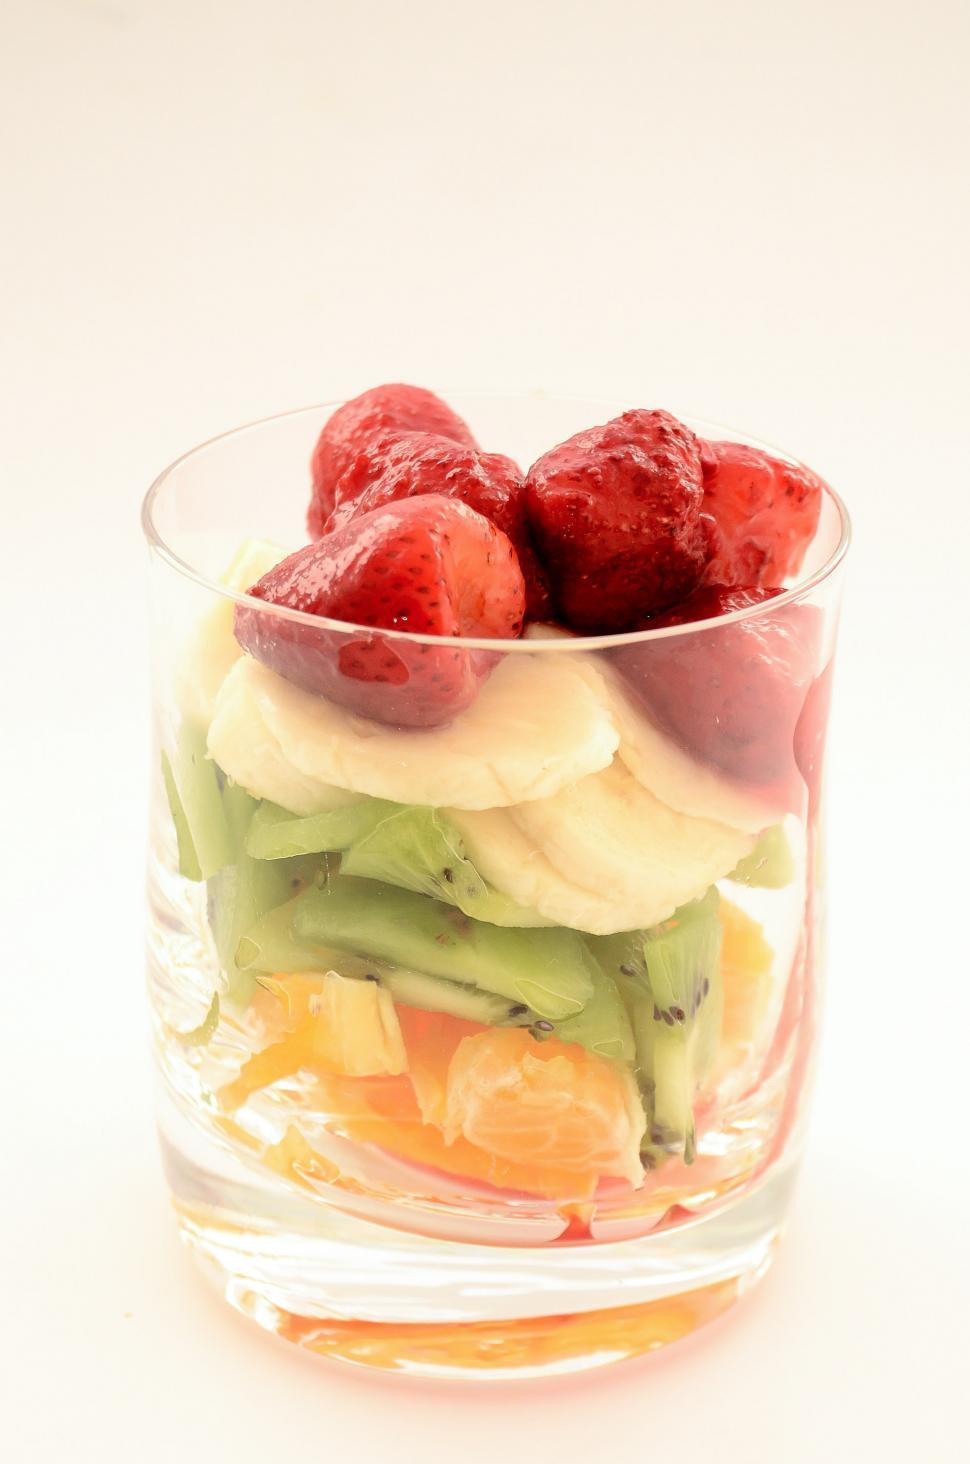 Free Image of Glass of Assorted Fruits and Vegetables 